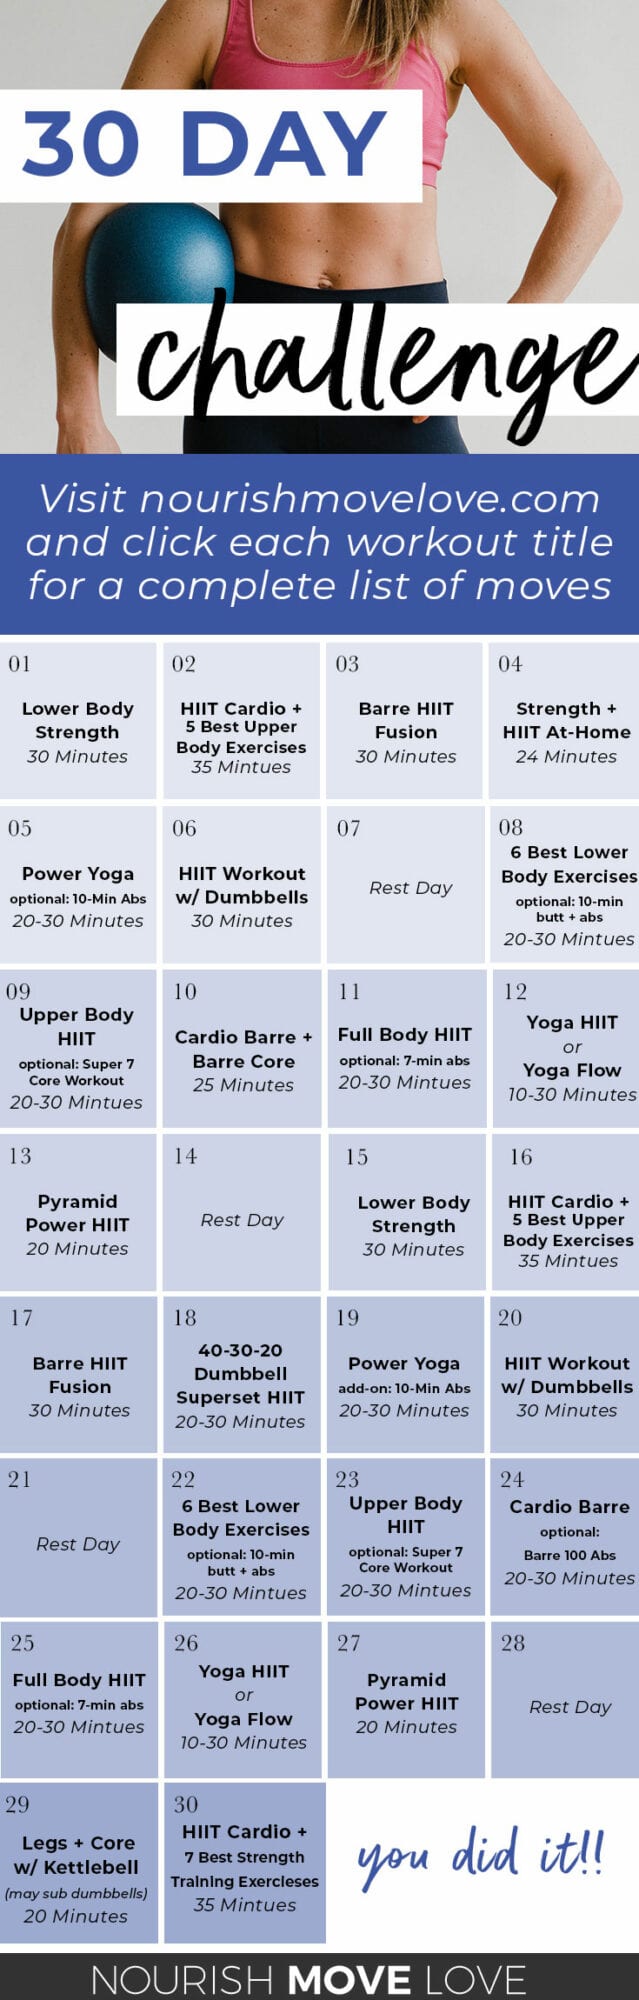 30 day workout challenge for weight loss - Nourish, Move, Love